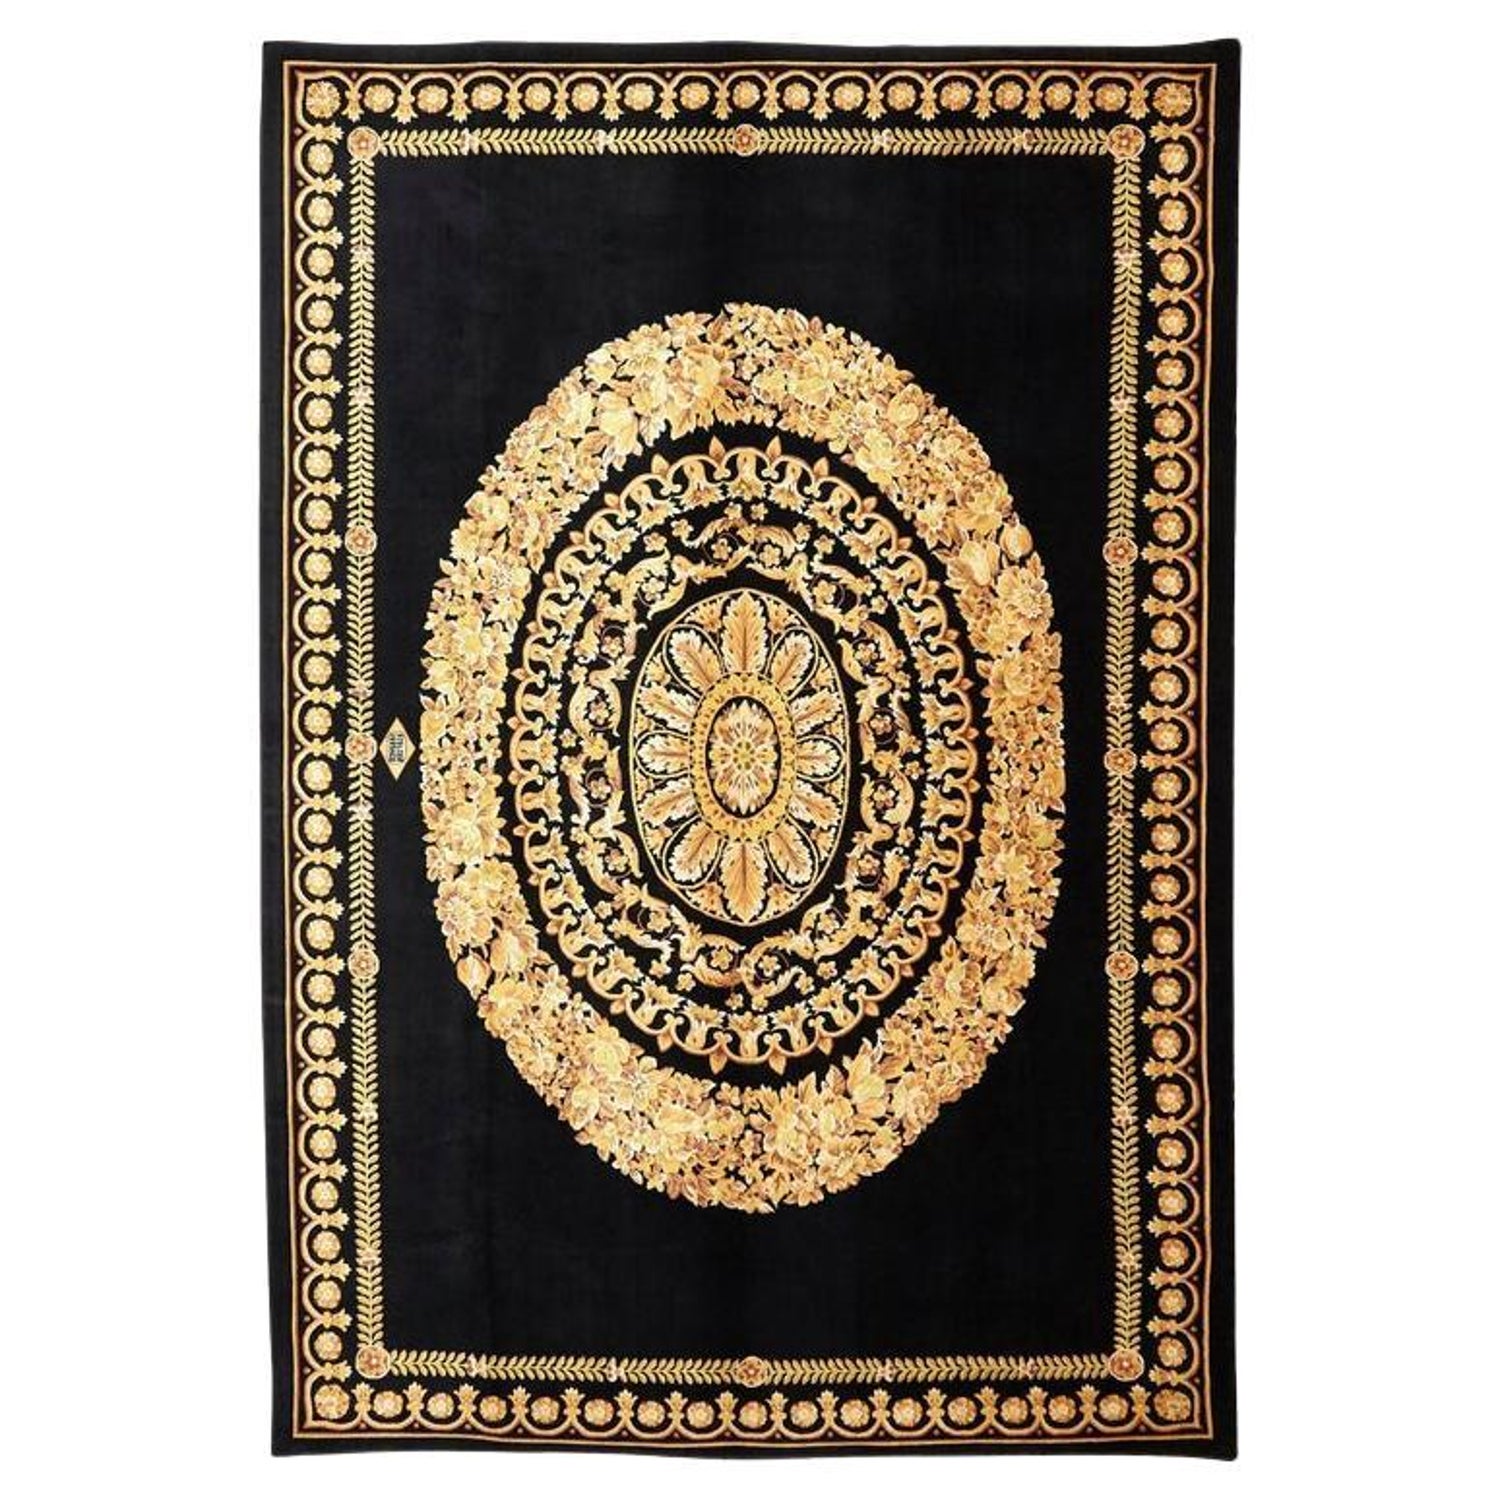 Gianni Versace Rugs and Carpets - 6 For Sale at 1stDibs | bersace rug,  black and gold versace rug, black versace rug